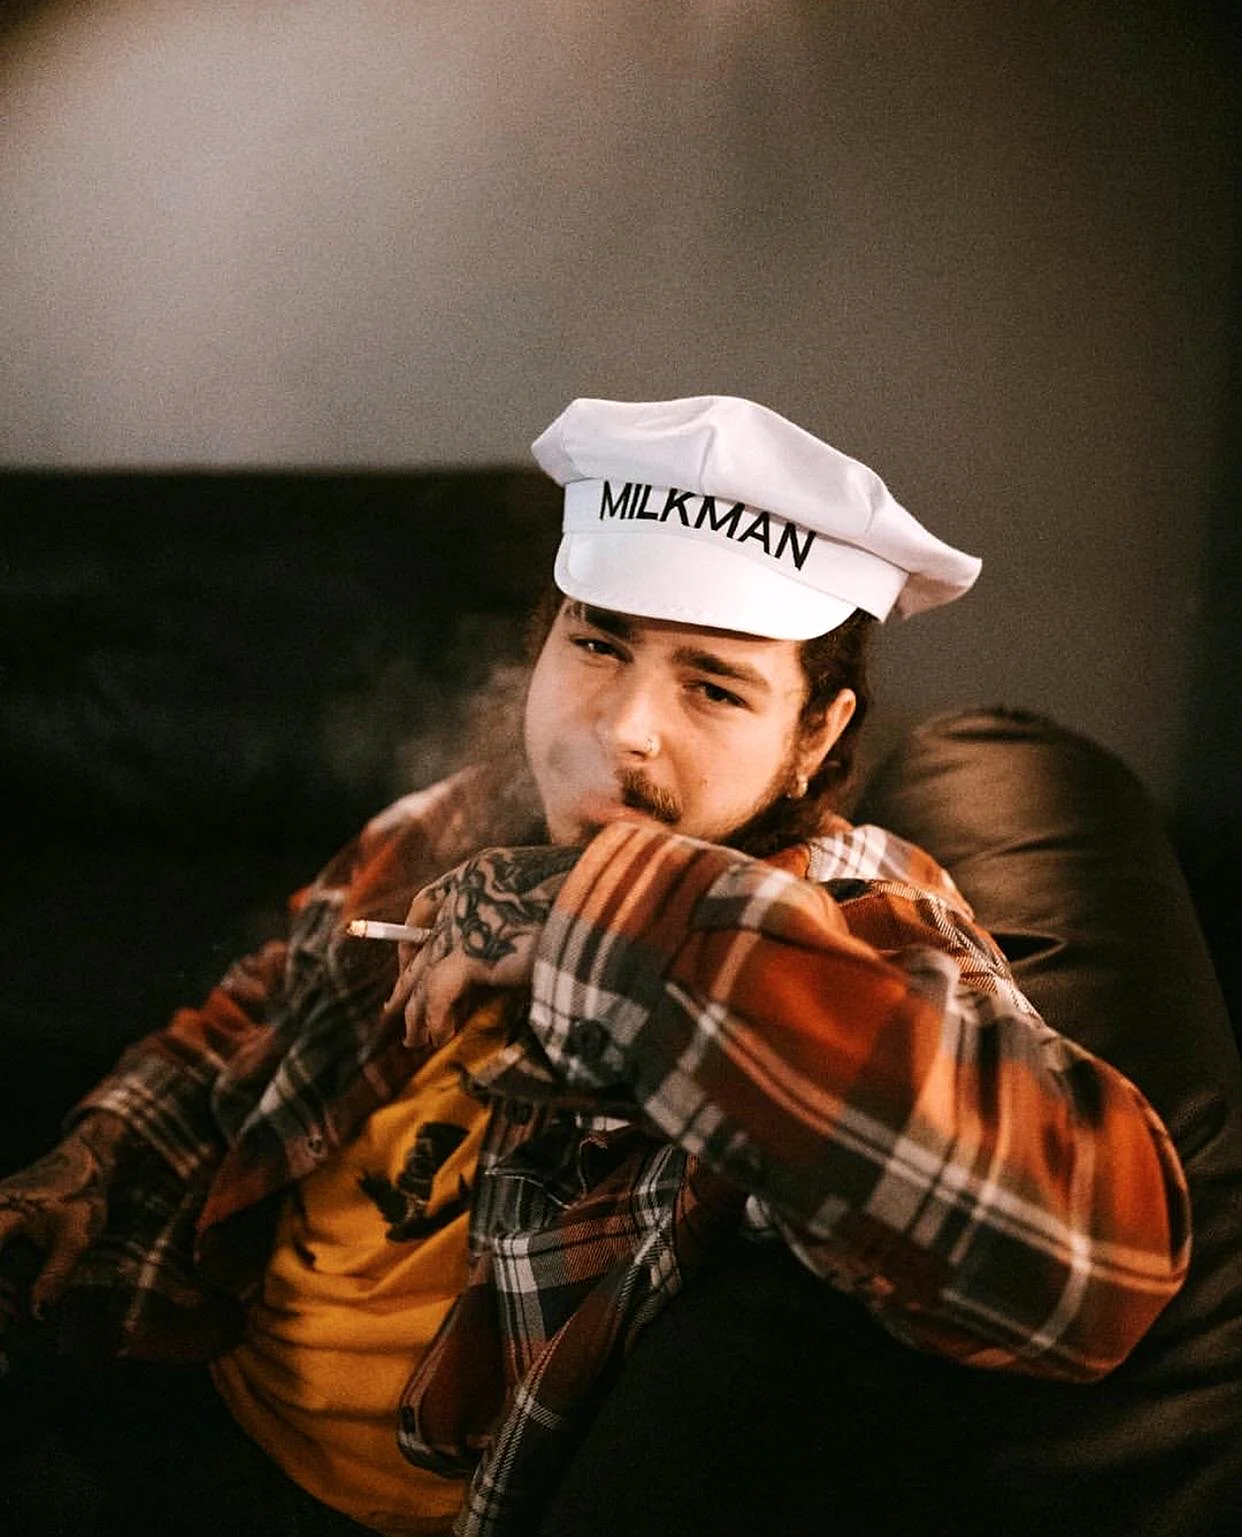 Post Malone Wallpaper For iPhone